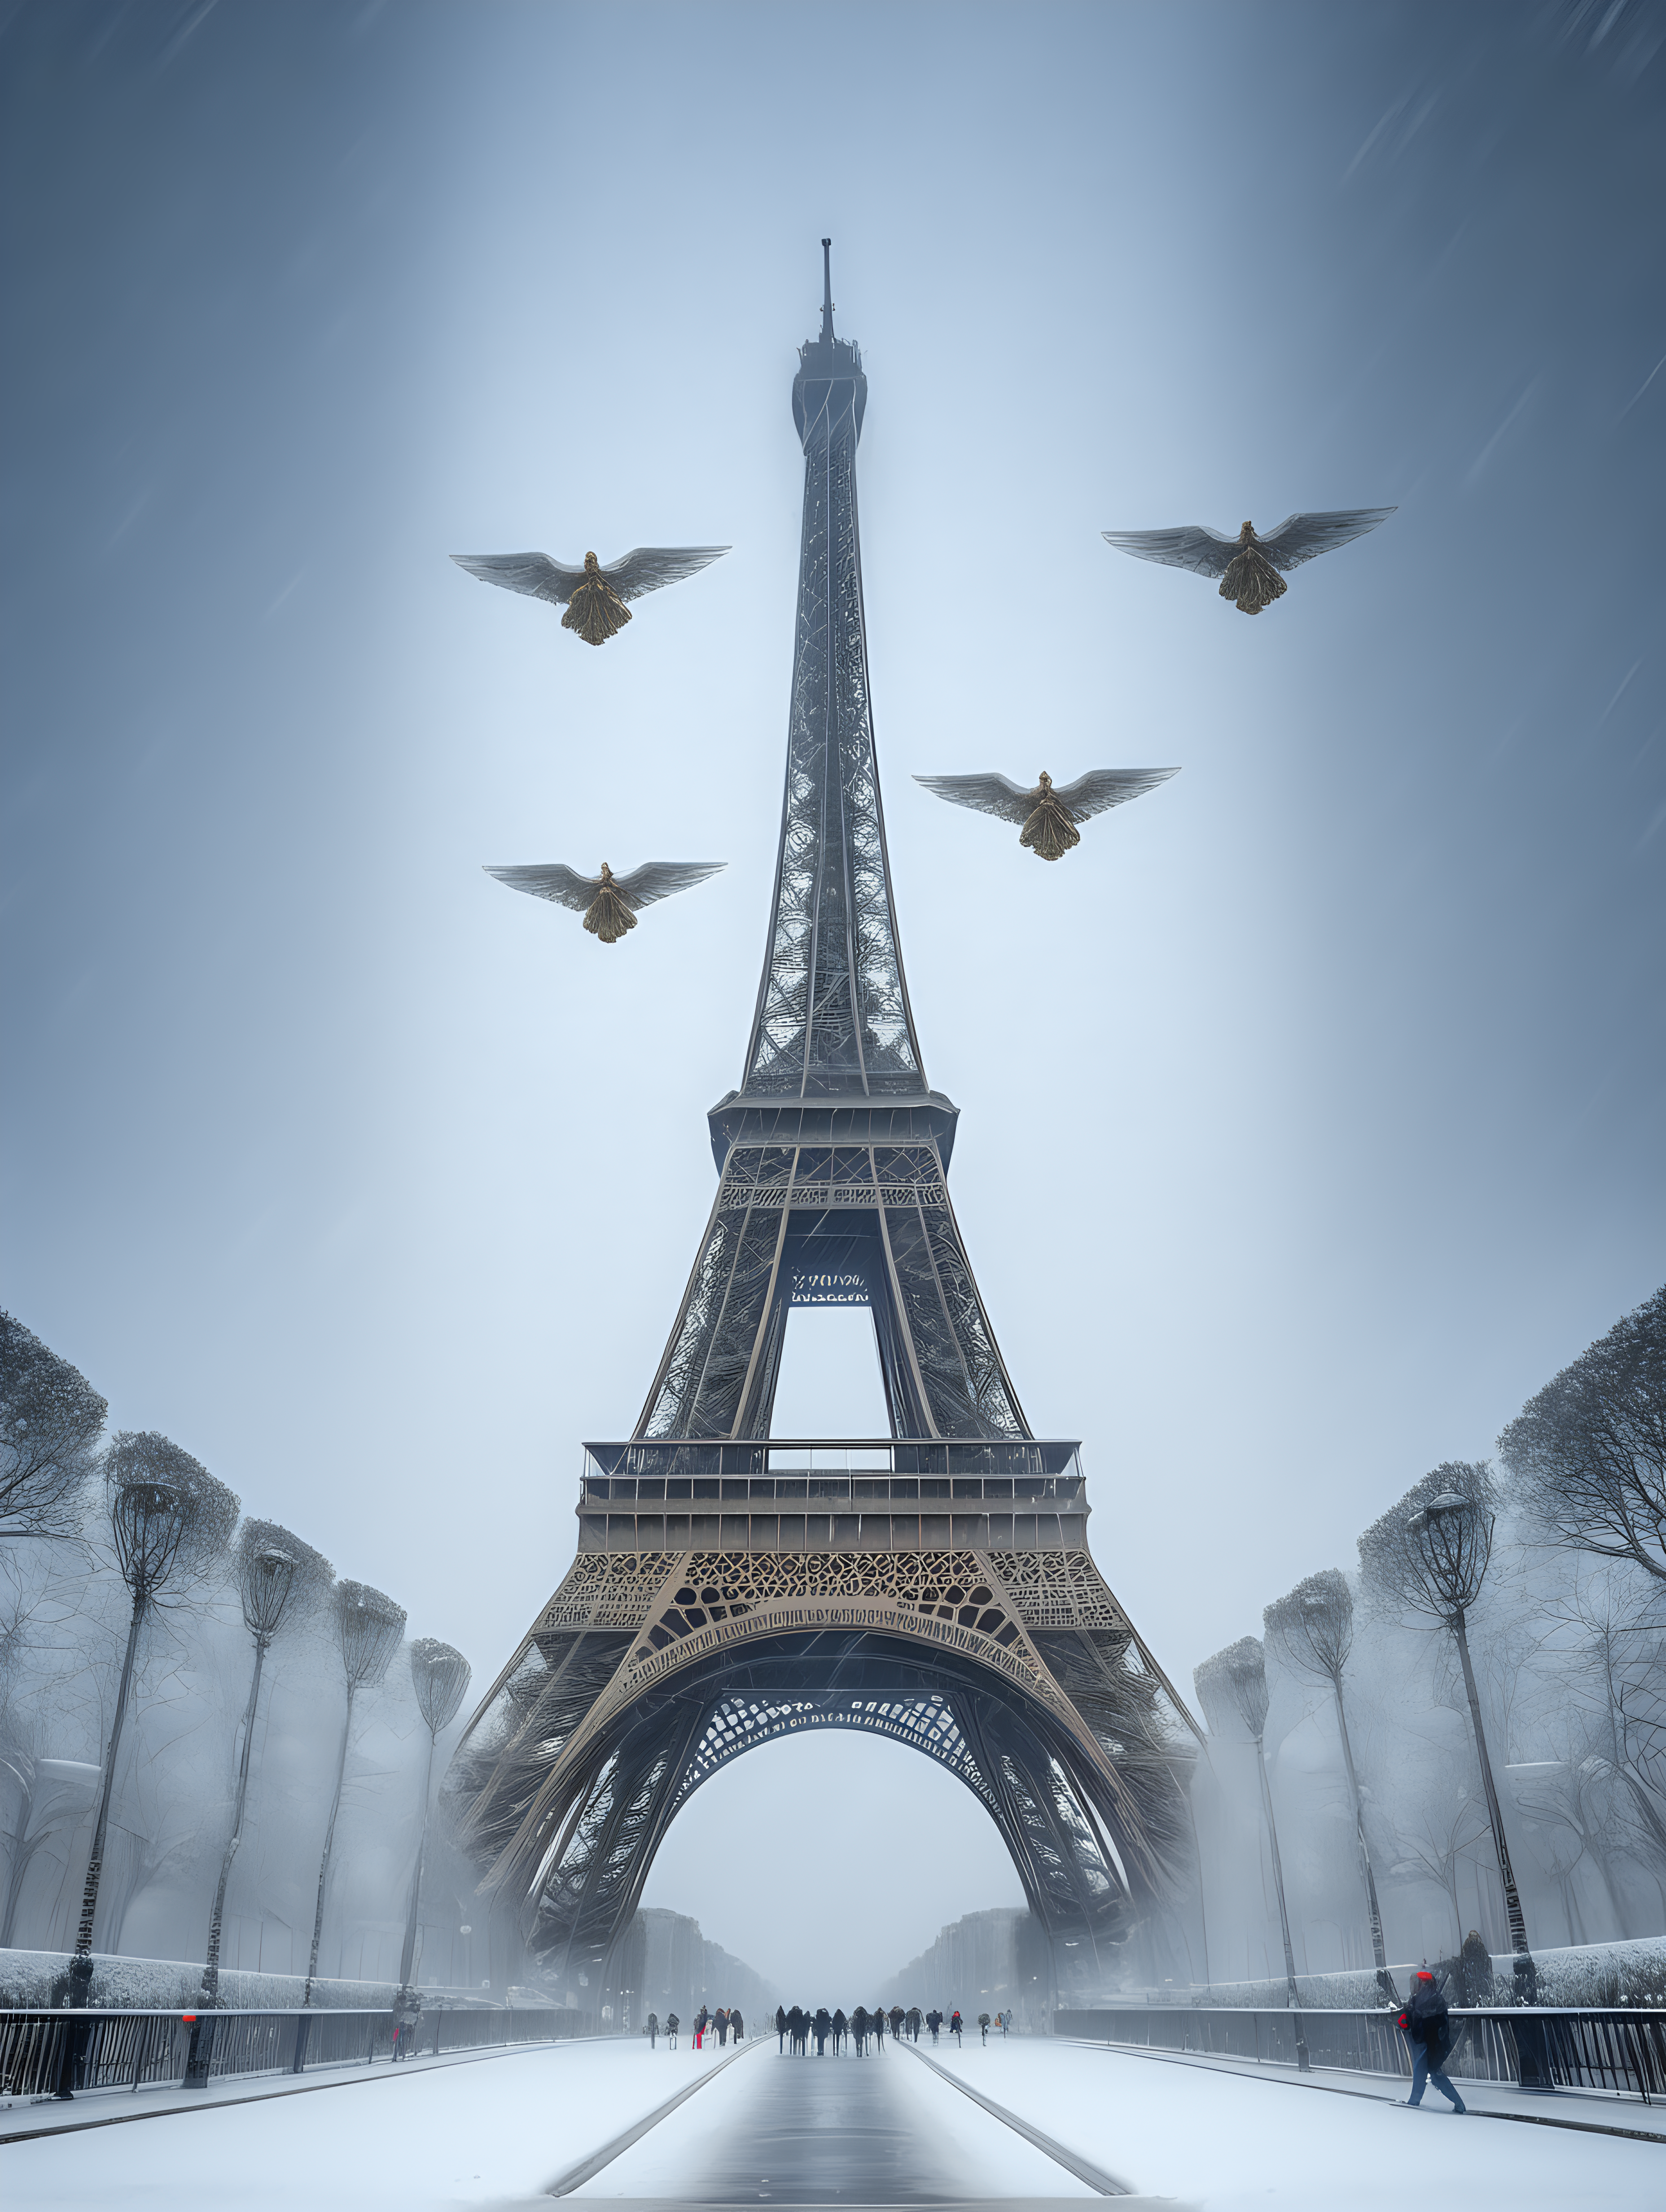 Eiffel tower in winter snow storm with 3 angels flying overhead